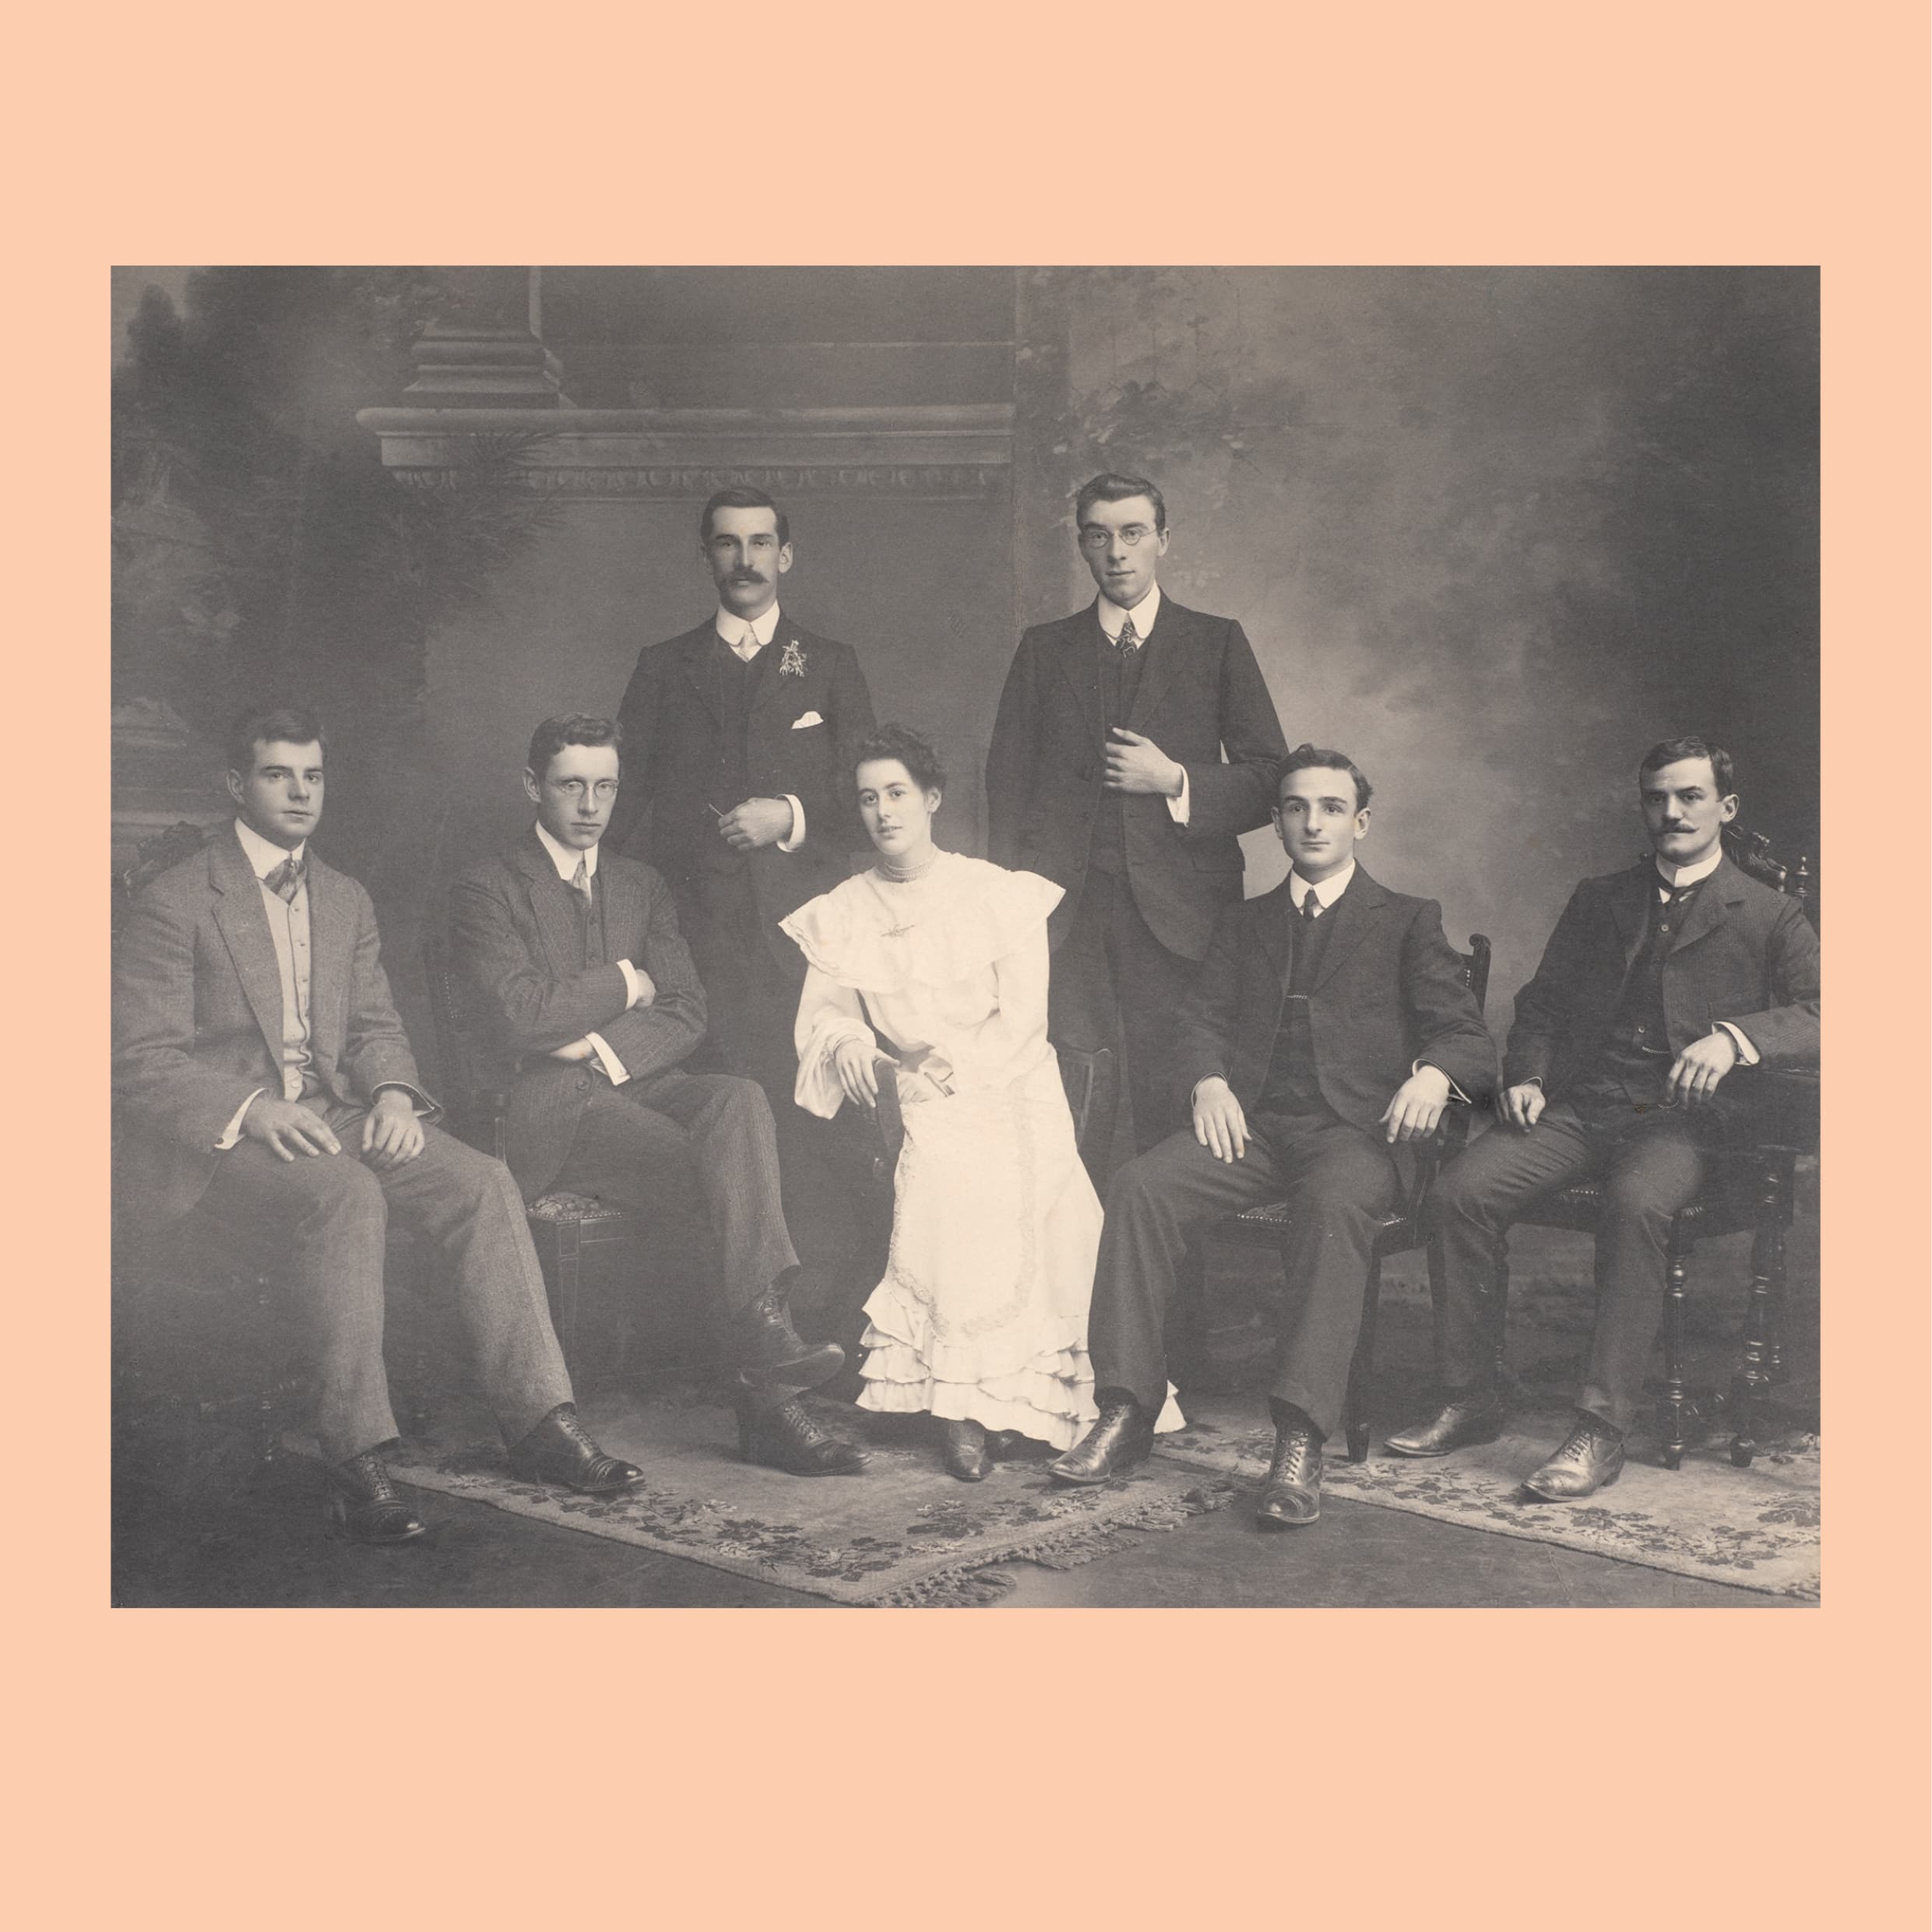 Dr Frances (Fanny) Gray LDS, BDS and dental students, c. 1906, photograph, image 22.5 × 28.0 cm. Williams family collection.  